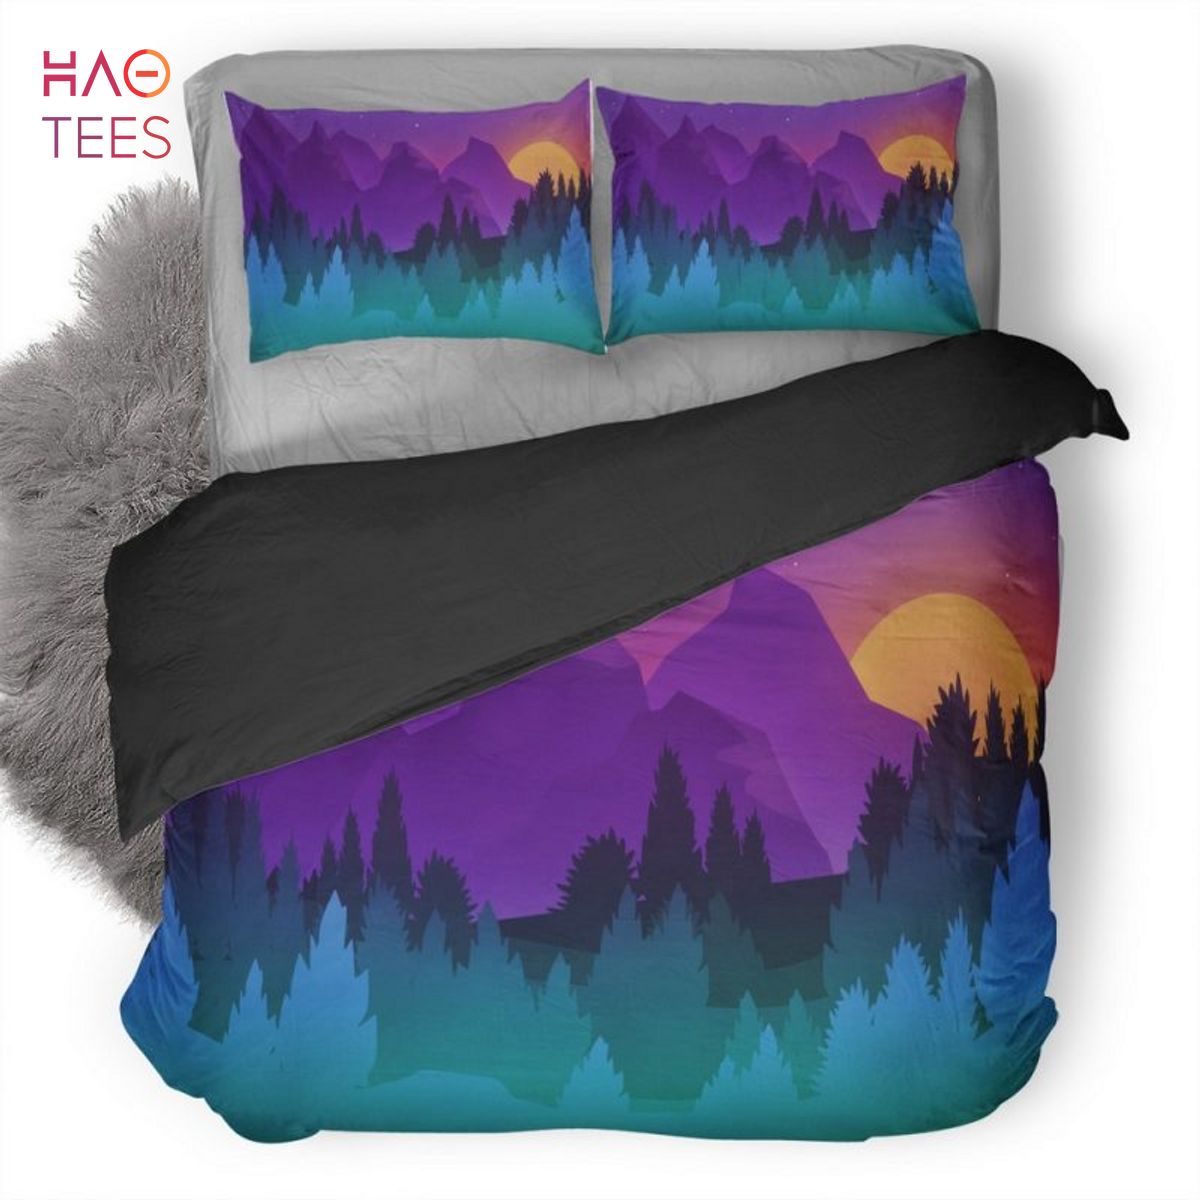 BEST Stars Mountains Trees Colorful Minimalist Artwork Duvet Cover and Pillowcase Set Bedding Set